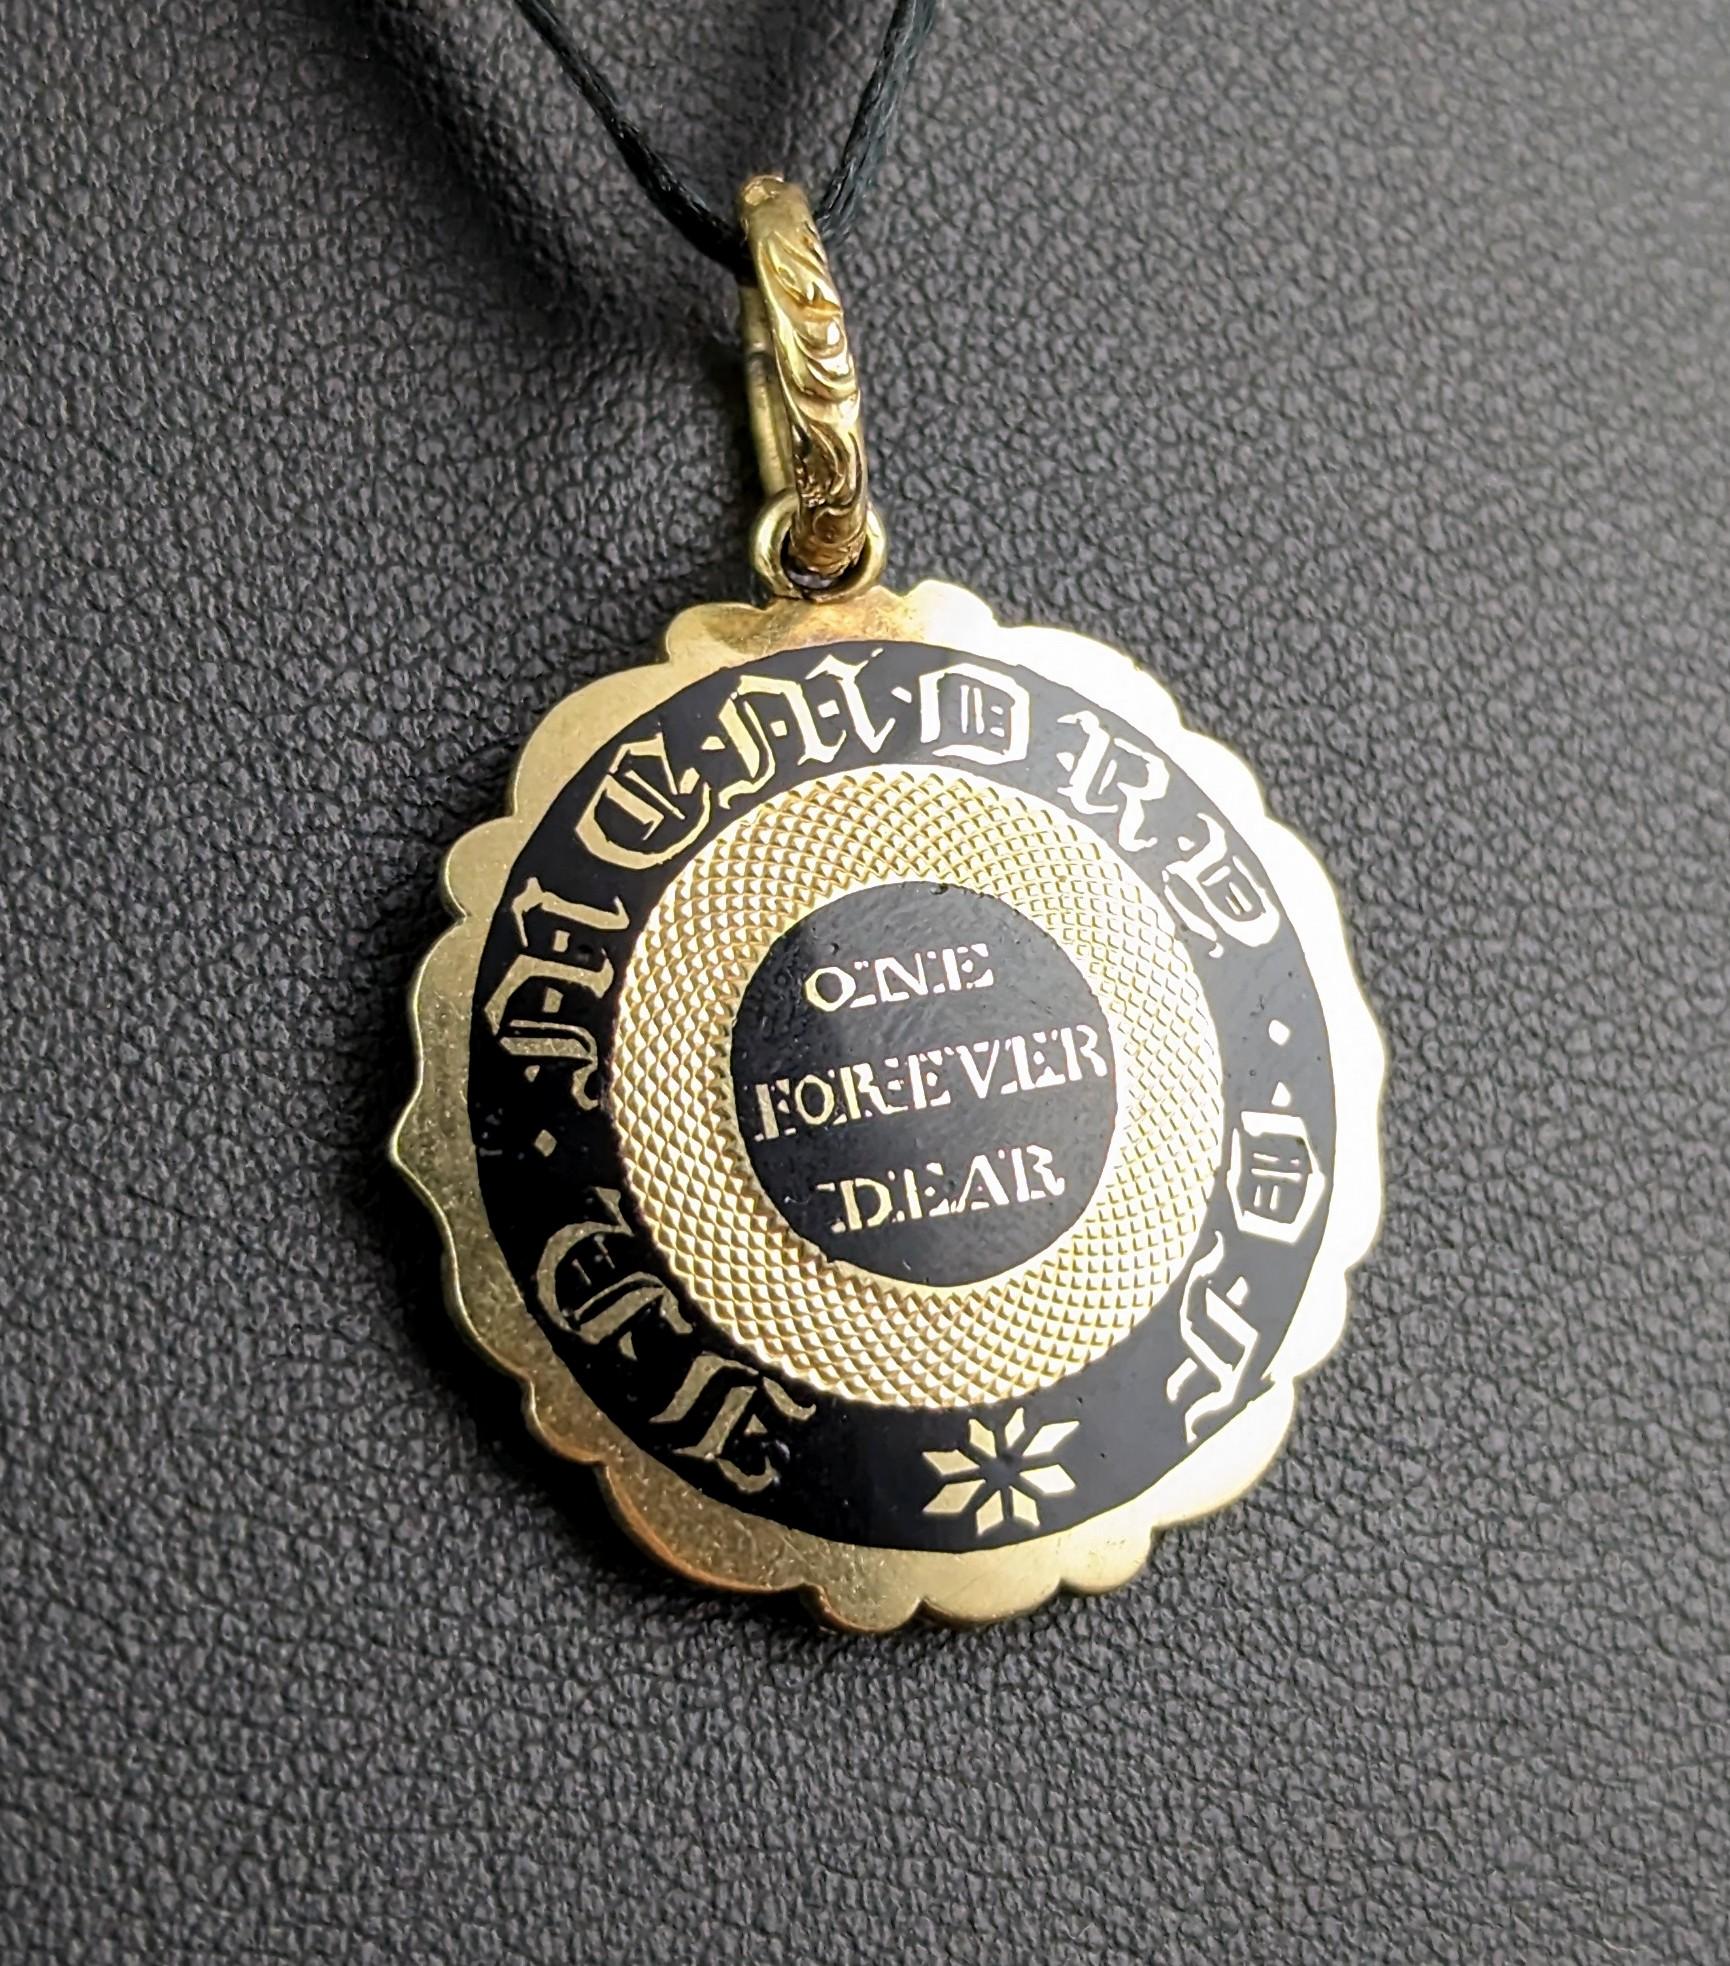 This antique Georgian mourning locket is mesmerisingly beautiful!

Late Georgian era, it is a circular shaped locket pendant with a scrolling edge and the most charming chased and engraved bale.

The front of the pendant is decorated in rich black